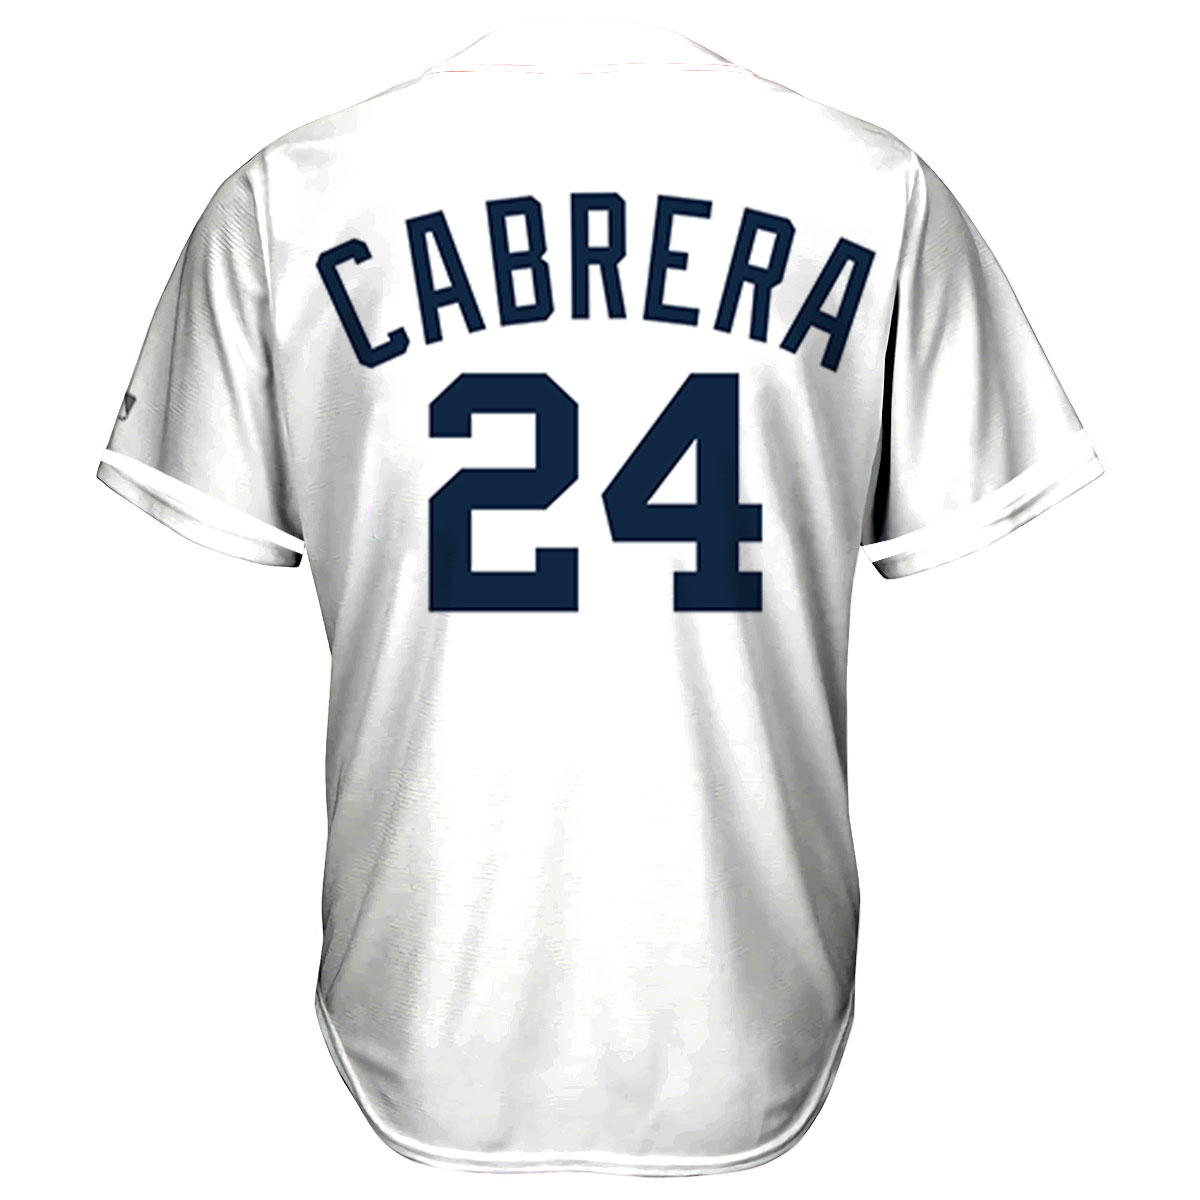 Cabrera Tigers Jersey Shirt Giveaway 2023 - Nouvette